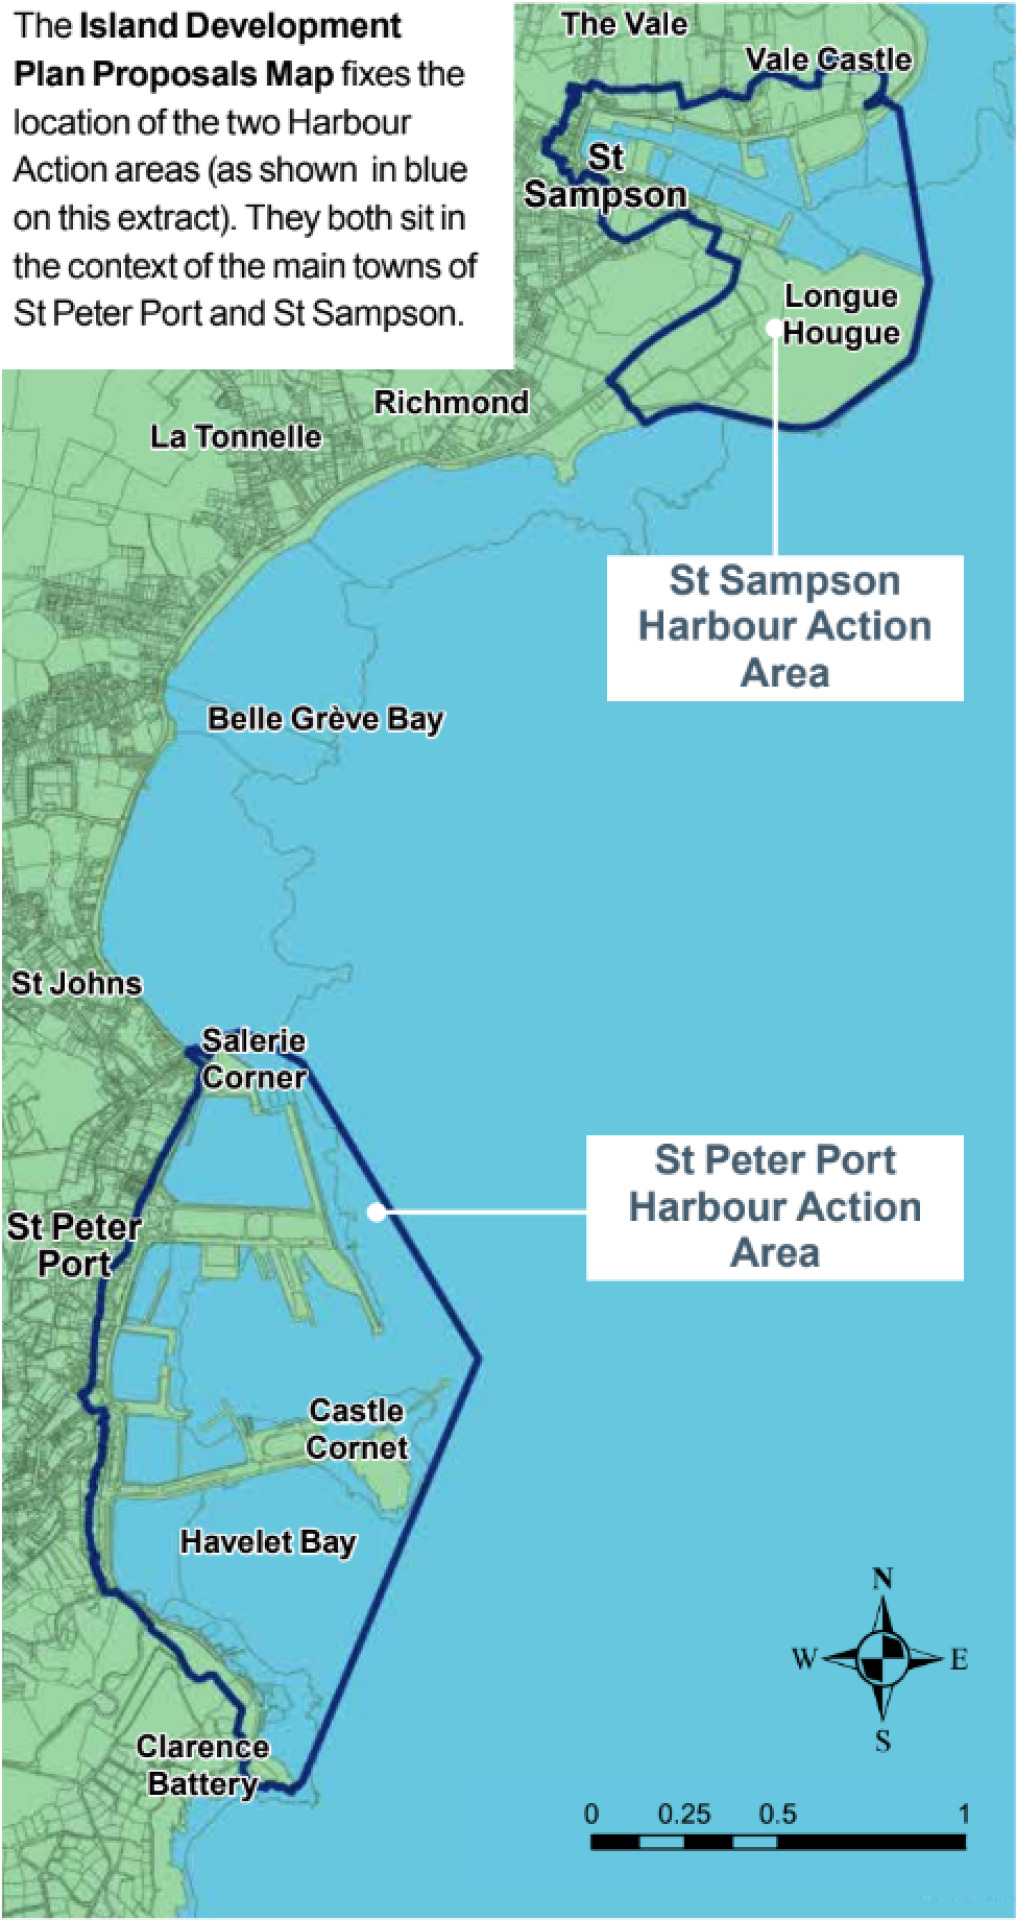 The location of the Harbour Action Areas